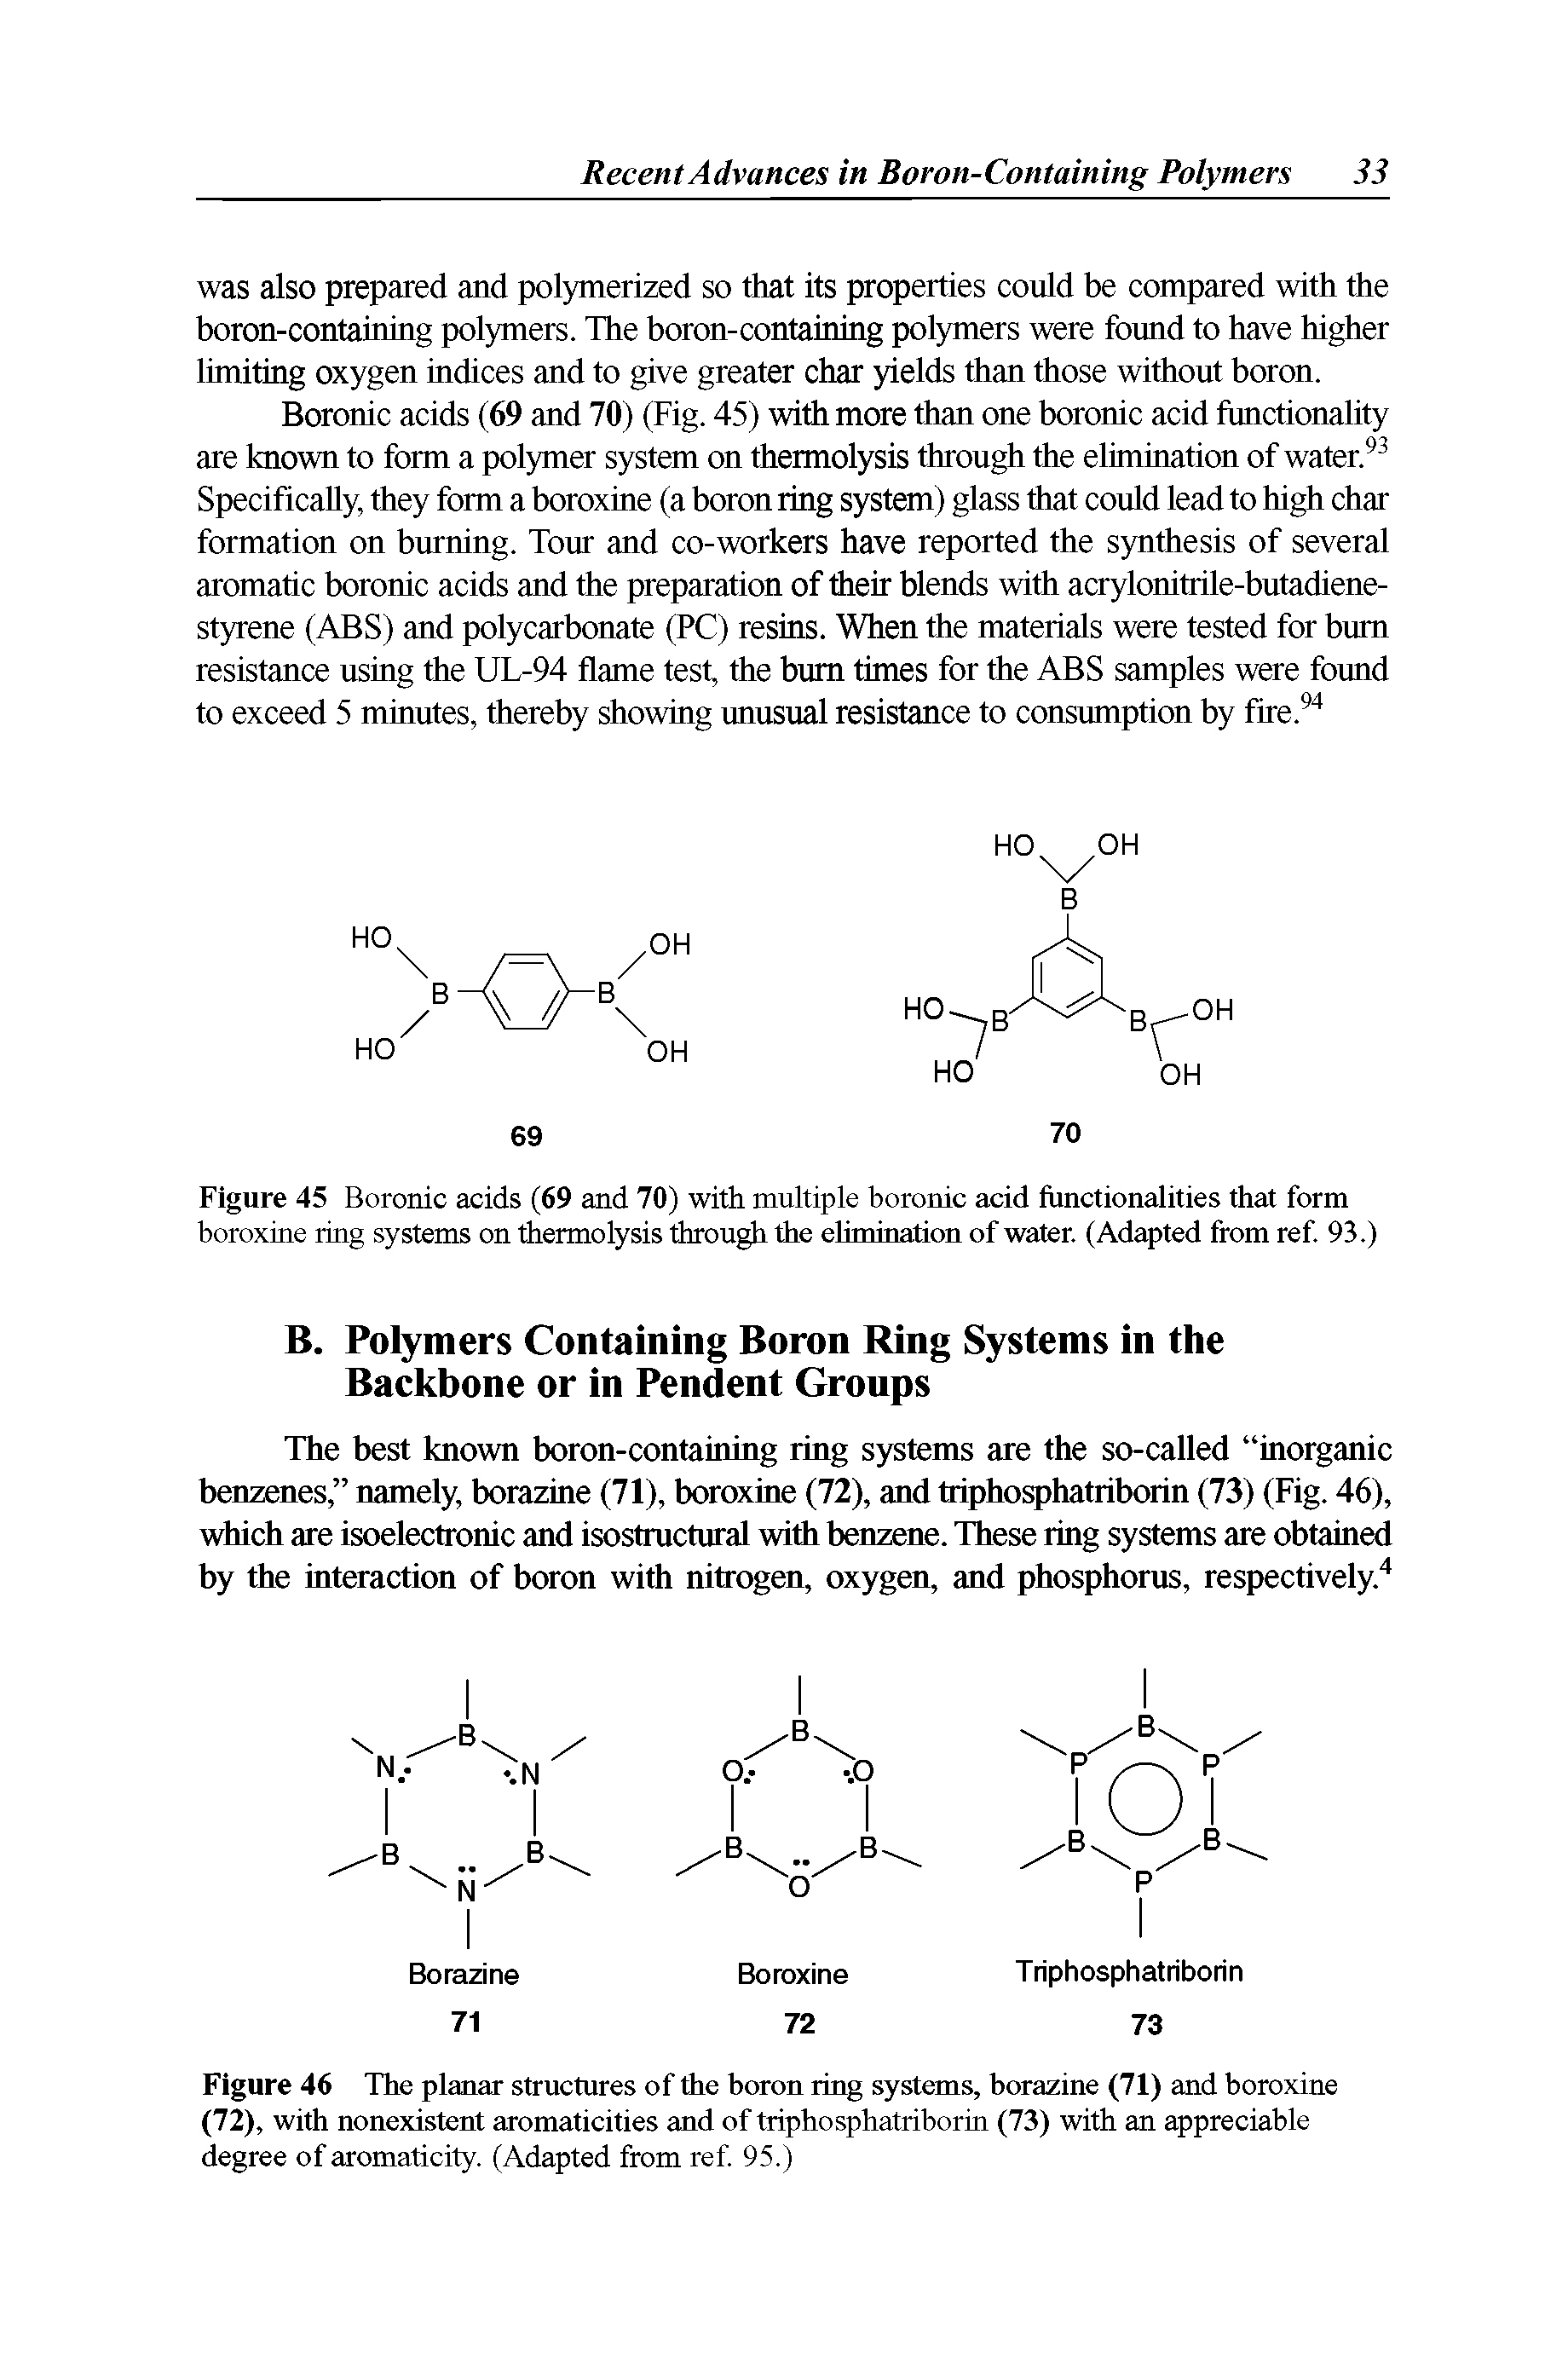 Figure 46 The planar structures of the boron ring systems, borazine (71) and boroxine (72), with nonexistent aromaticities and of triphosphatriborin (73) with an appreciable degree of aromaticity. (Adapted from ref. 95.)...